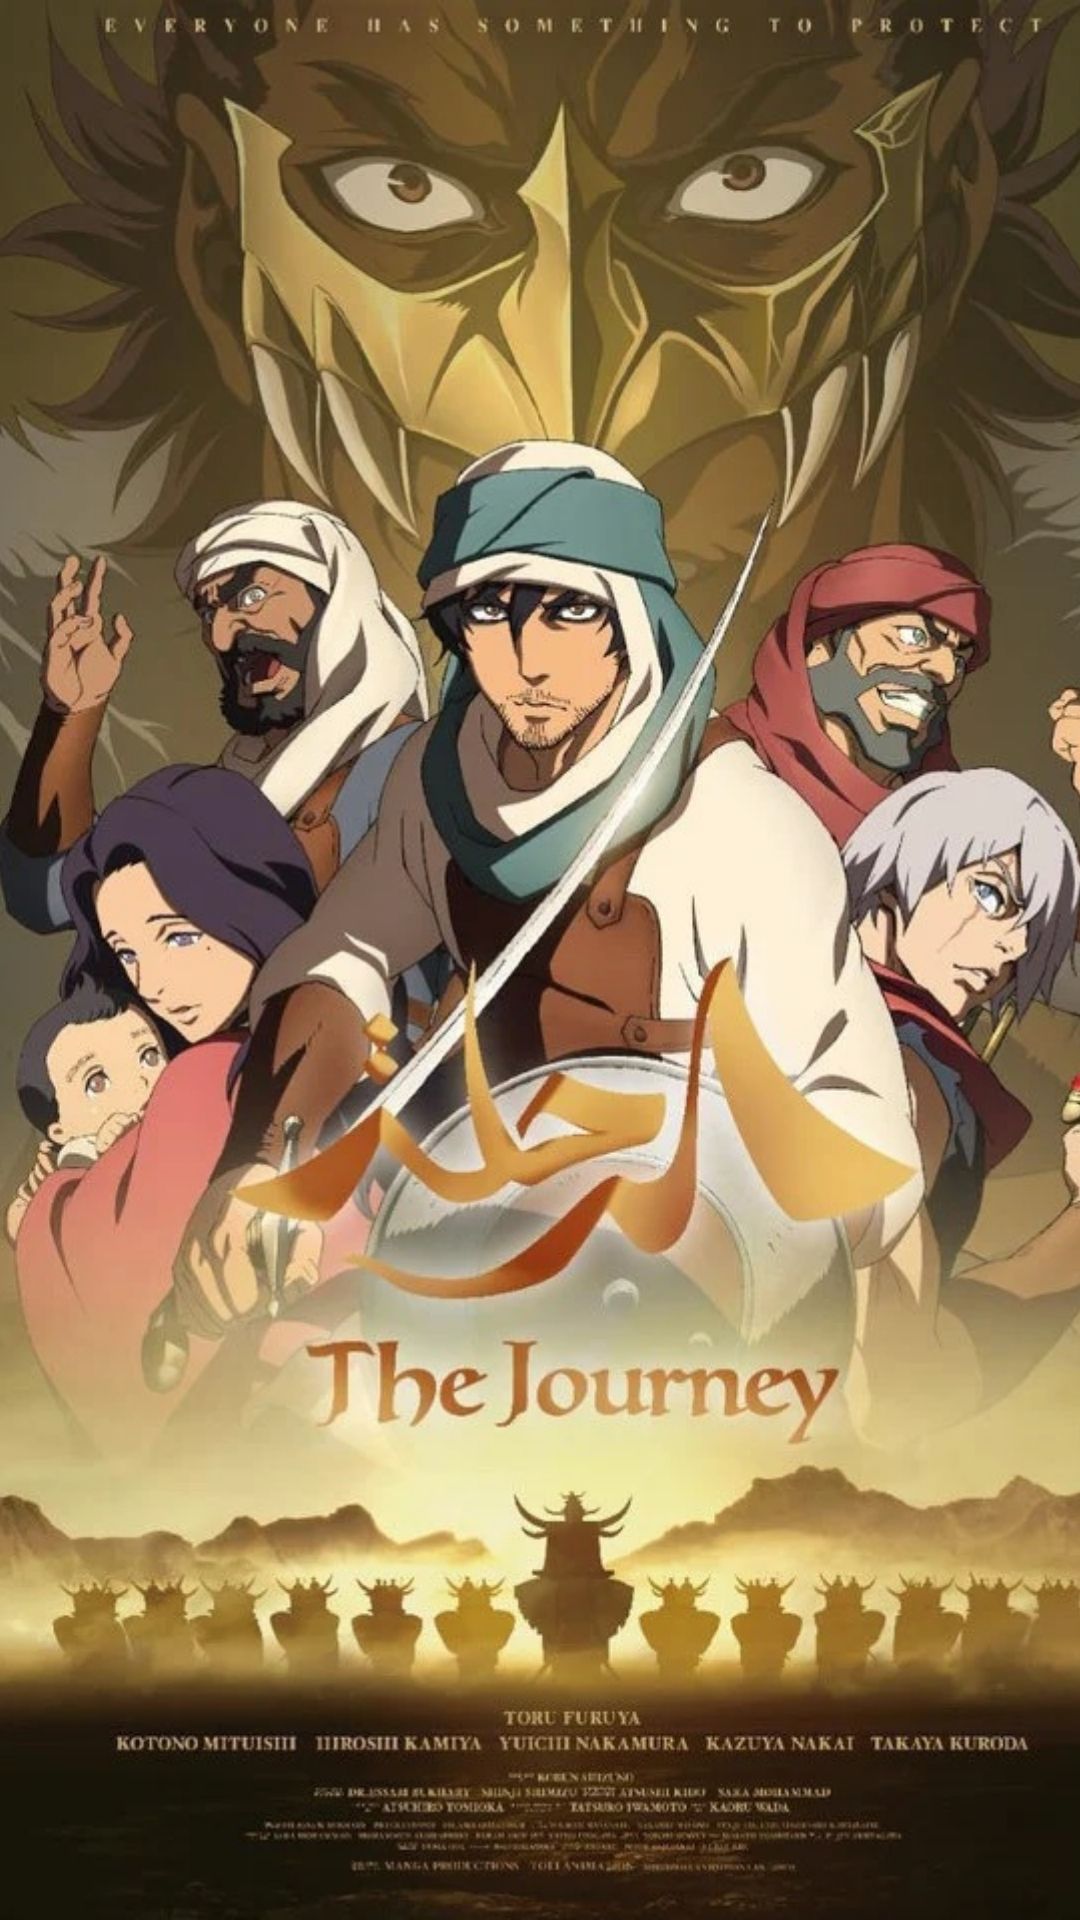 Toei’s The Journey Anime Film New Visual, June Debut